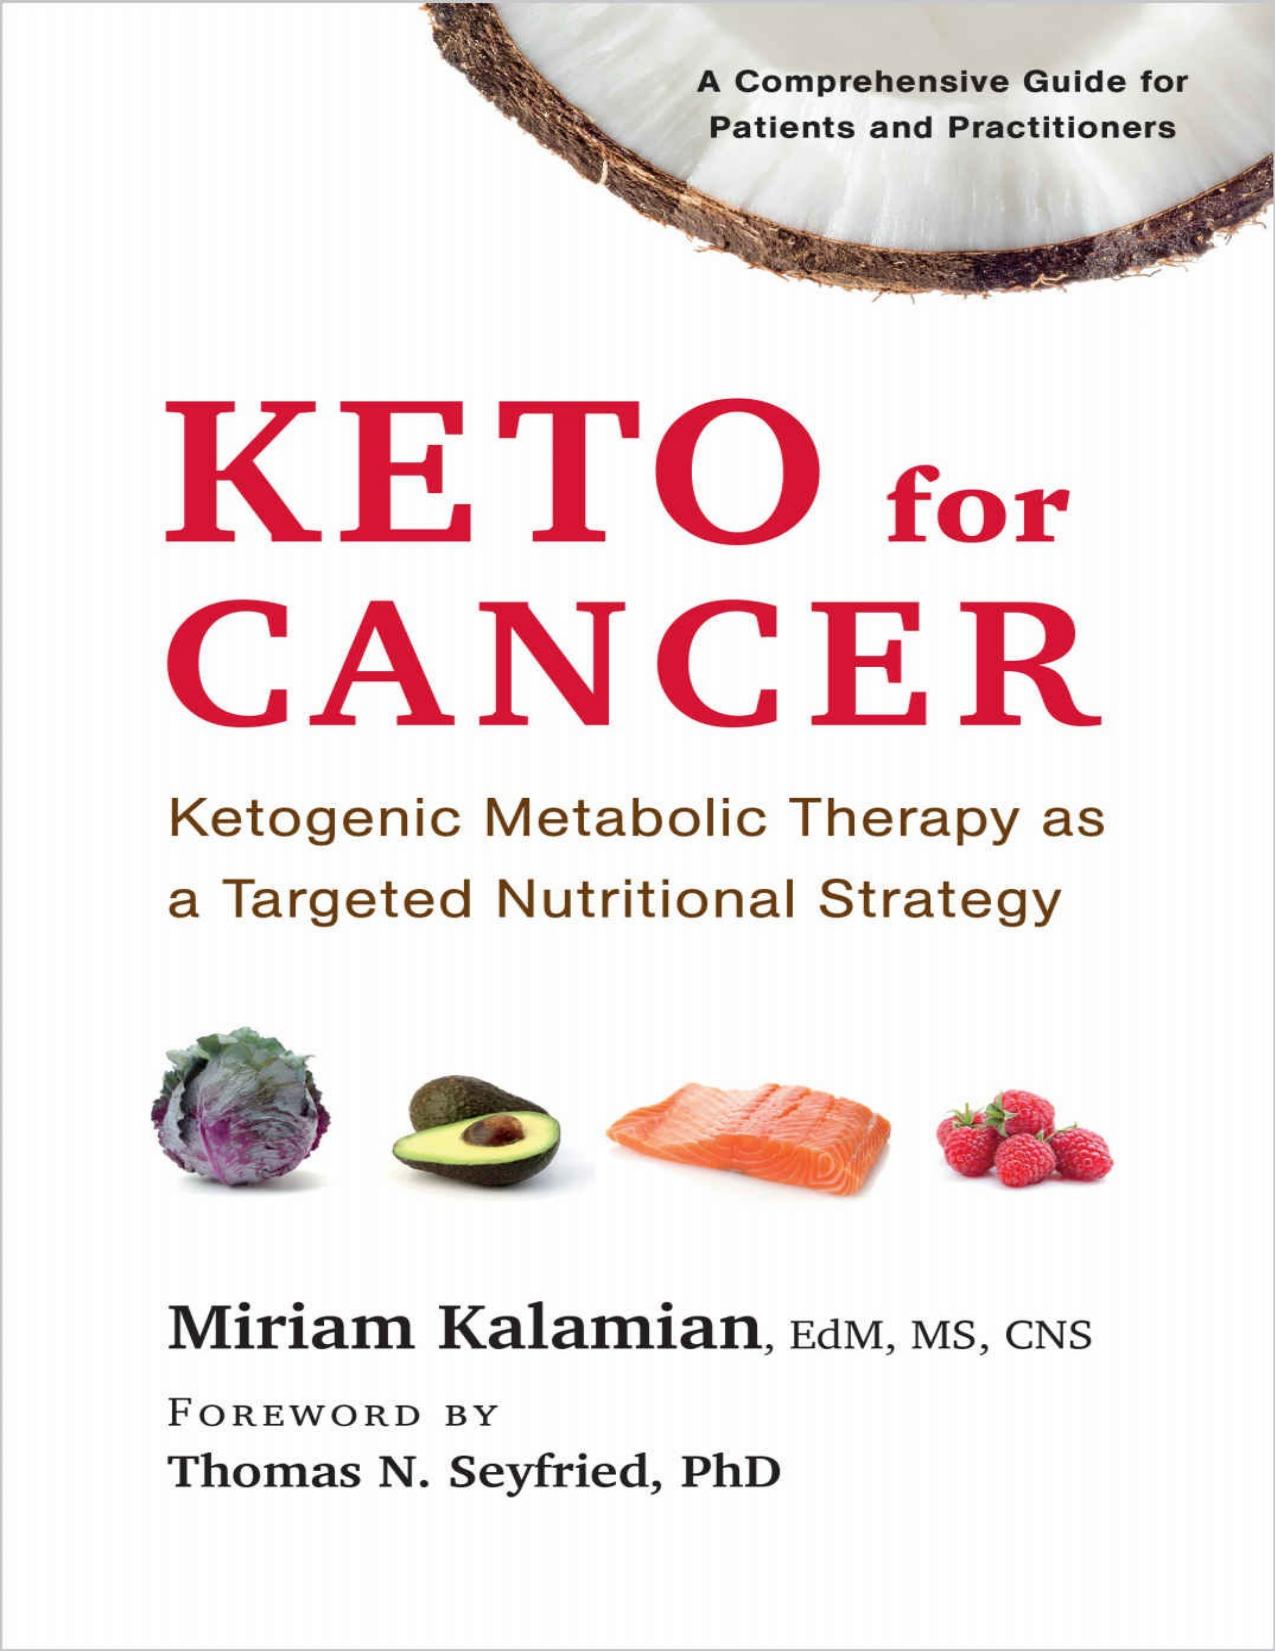 Keto for Cancer: Ketogenic Metabolic Therapy as a Targeted Nutritional Strategy - PDFDrive.com